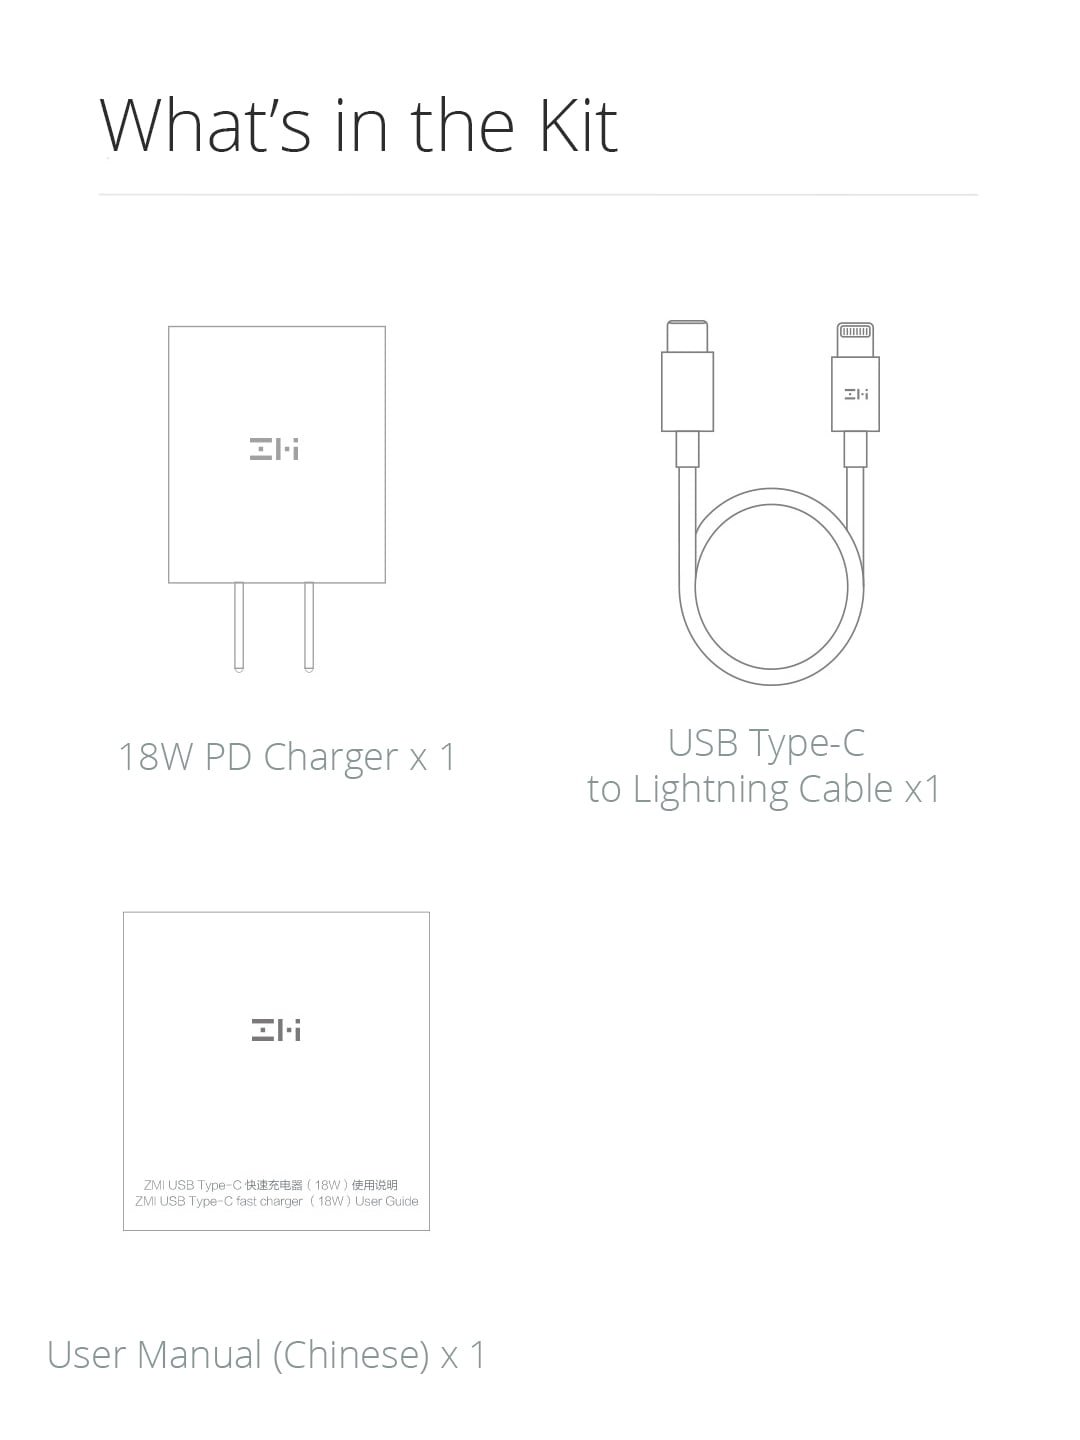 What’s in the Kit: 18W PD Charger x 1. USB Type-C to Lightning Cable x1. User Manual (Chinese) x 1